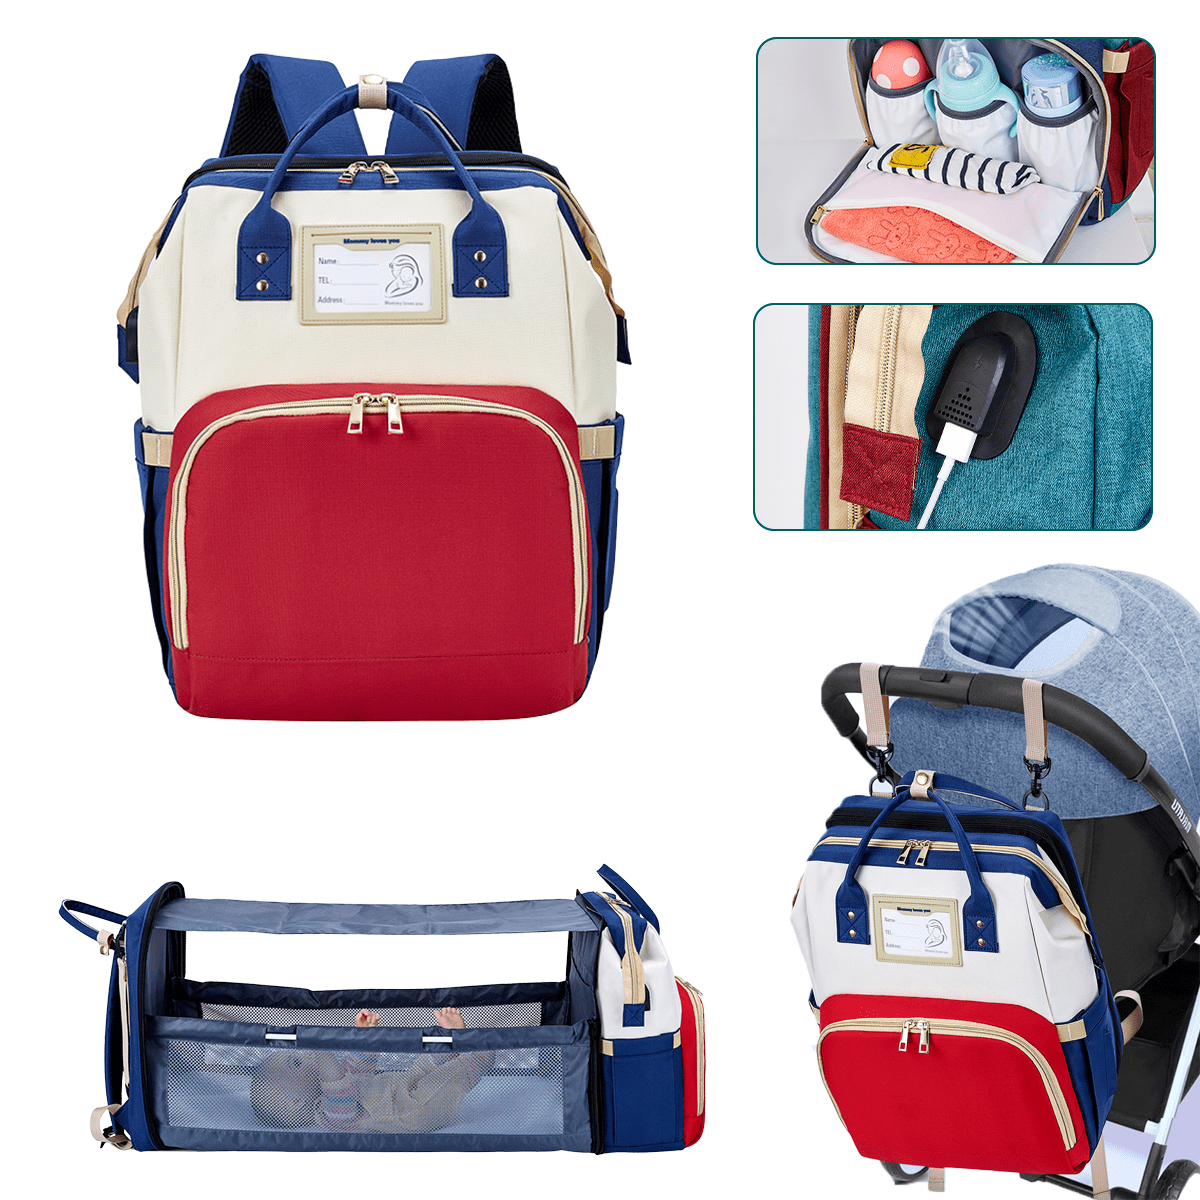 KABAQOO Diaper Bag Tote, Mommy Bag for Hospital & Maternity with 2  Organizing Pouches, Large Waterproof Travel Baby Bag for Mom, Newborn  Registry Baby